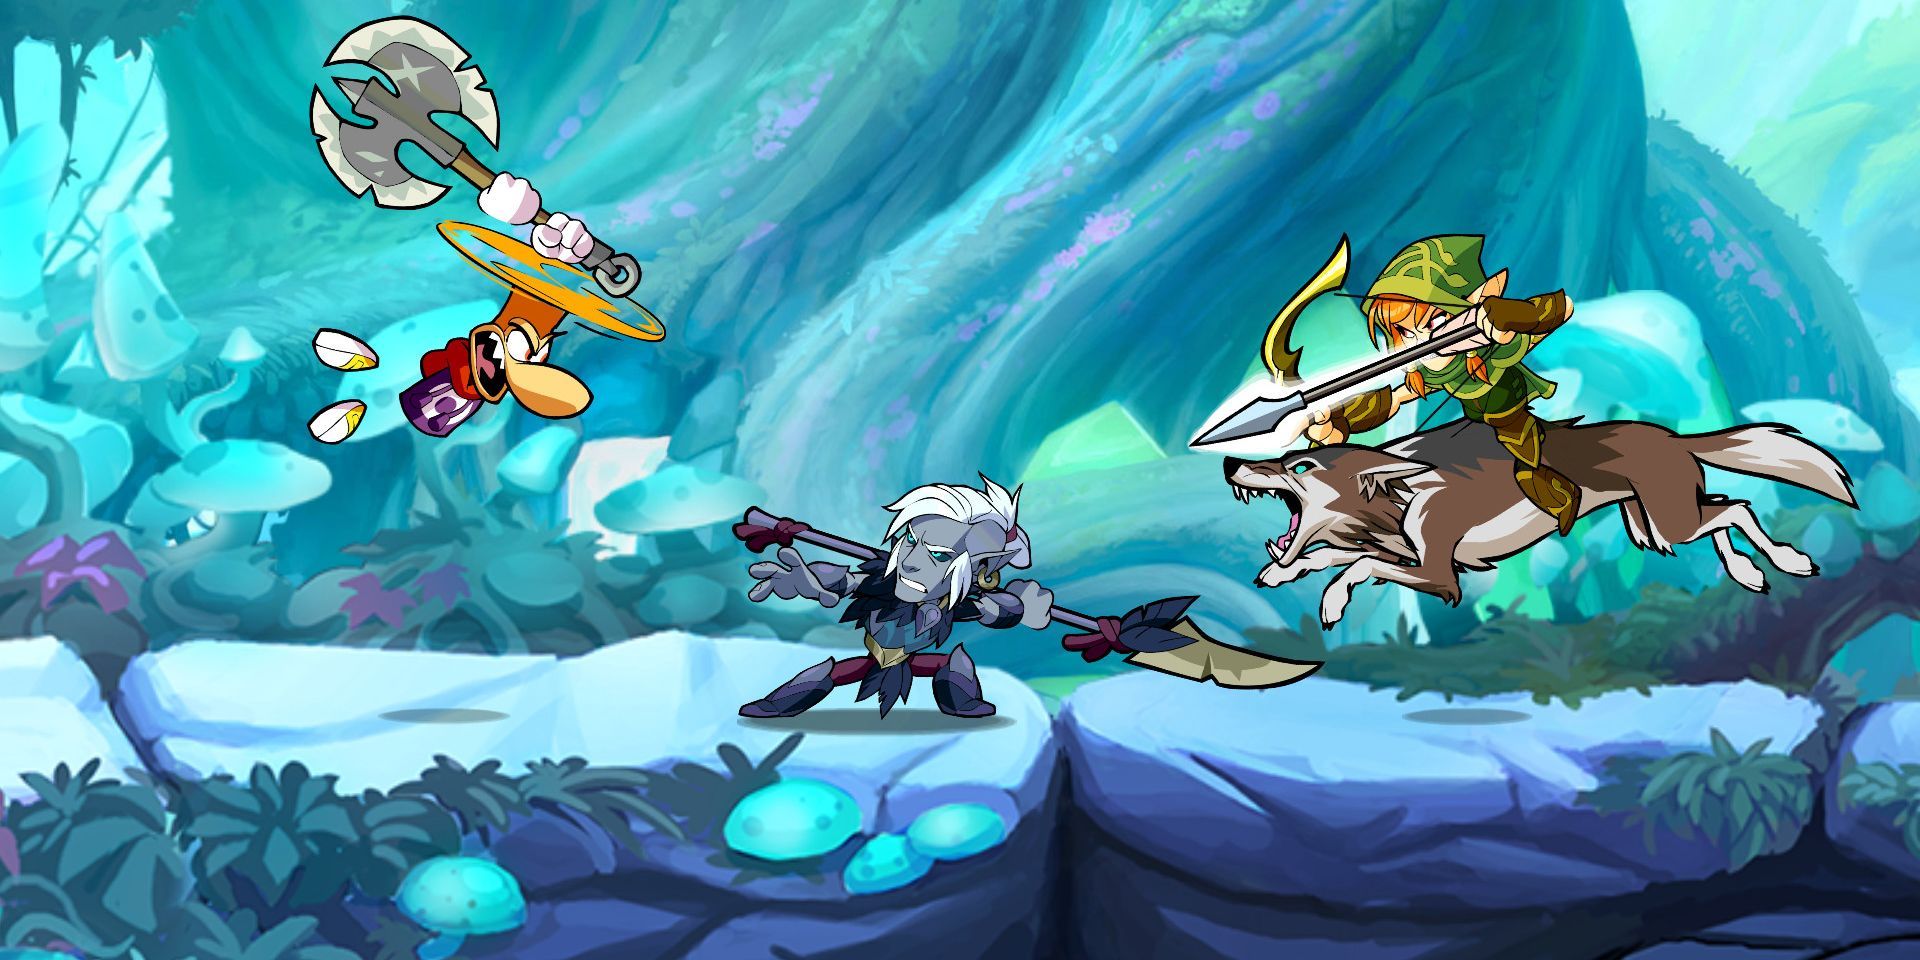 Rayman and two other characters fighting in Brawlhalla